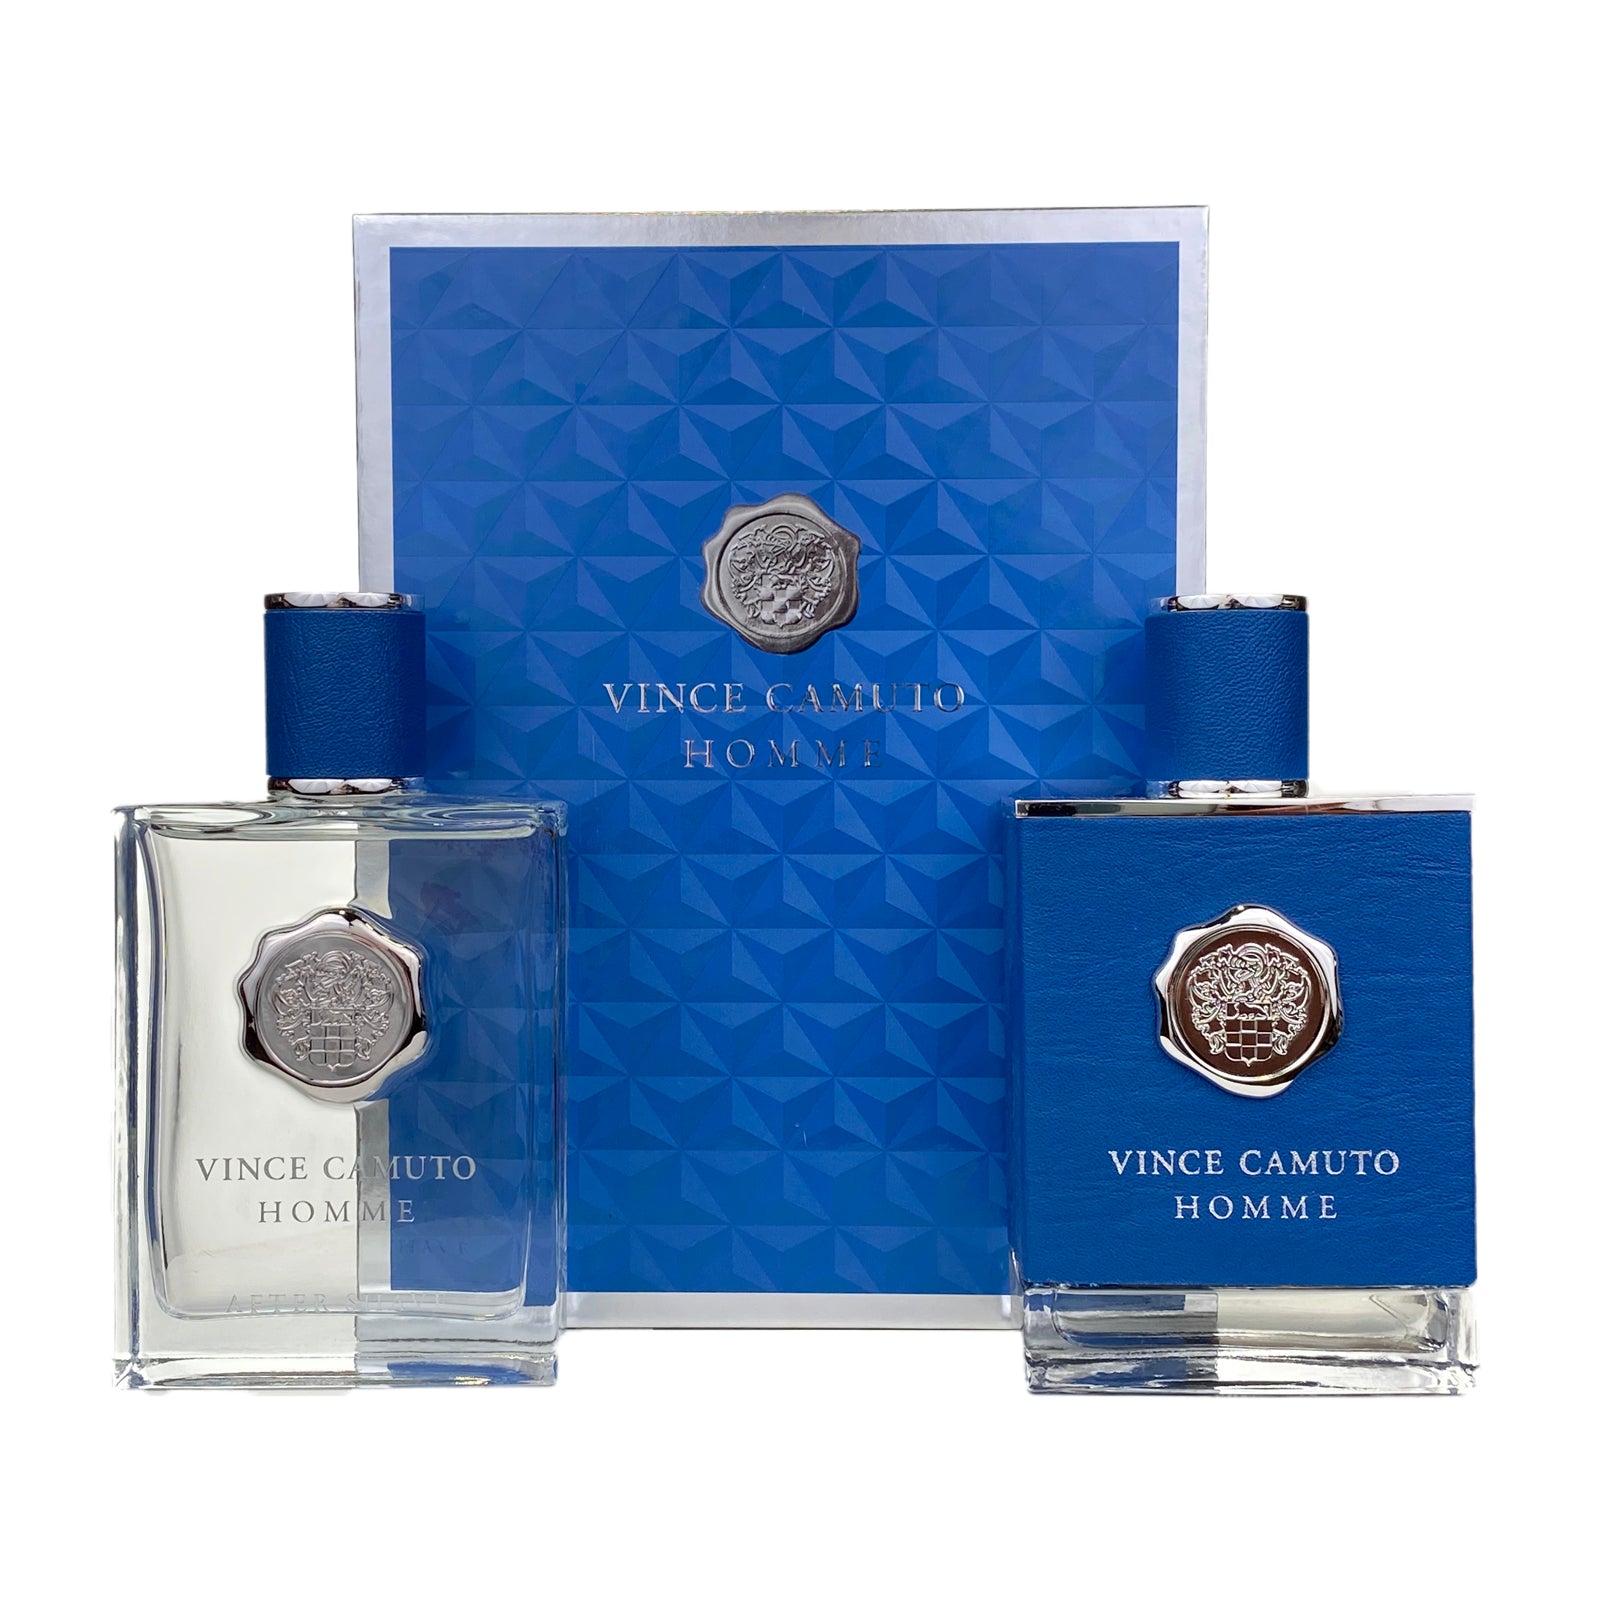 Vince Camuto Homme 2 Pc. Gift Set by Vince Camuto for Men